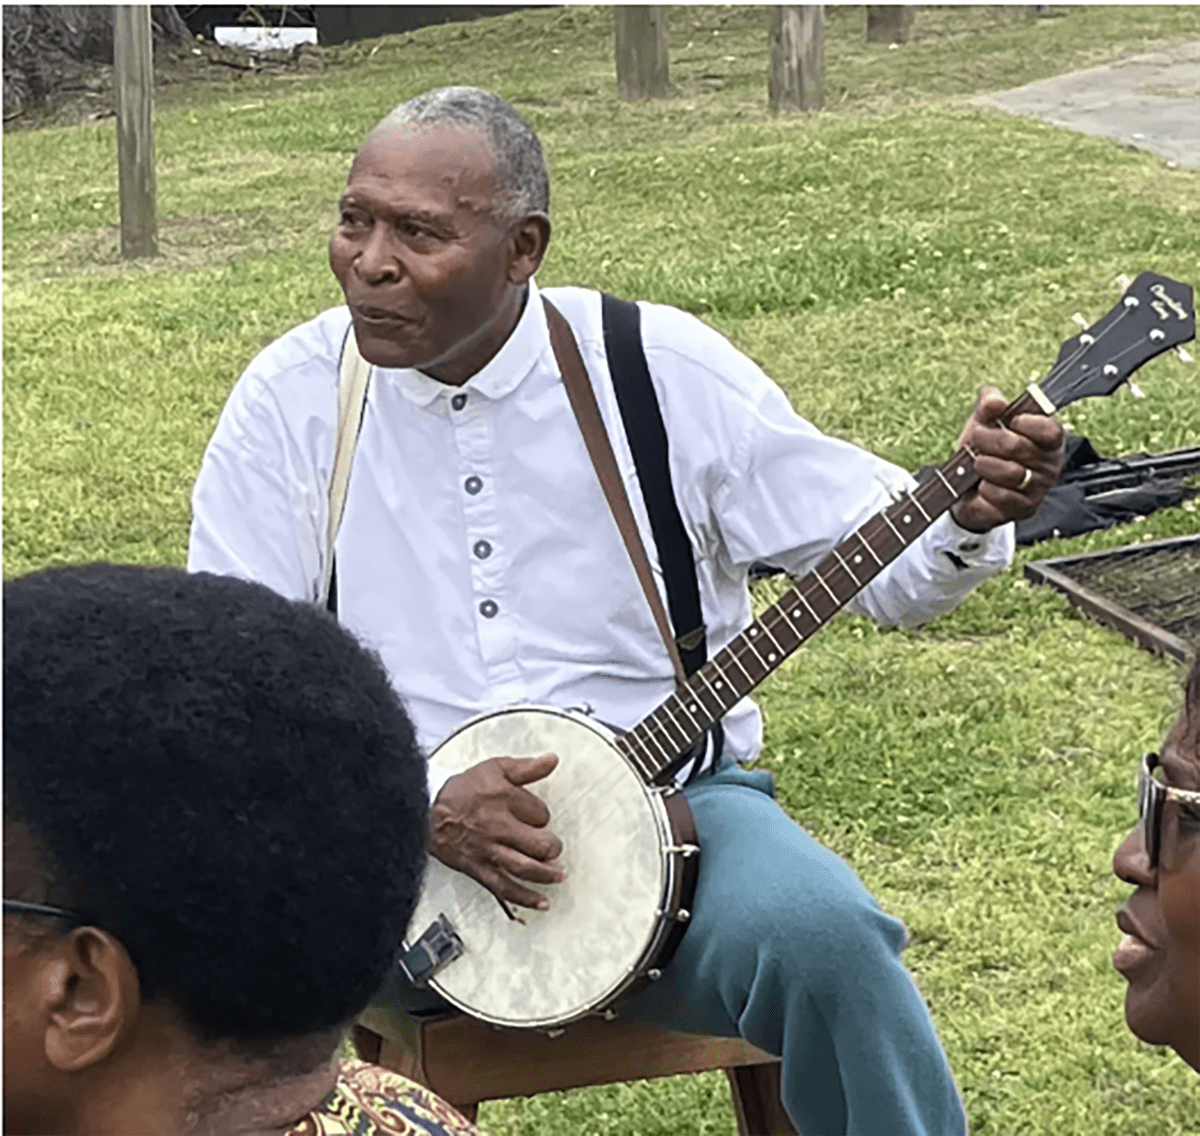 As part of the commemoration, Mr. Curtis Thompson performed traditional songs on the banks of the Roanoke River. Photo: David Cecelski